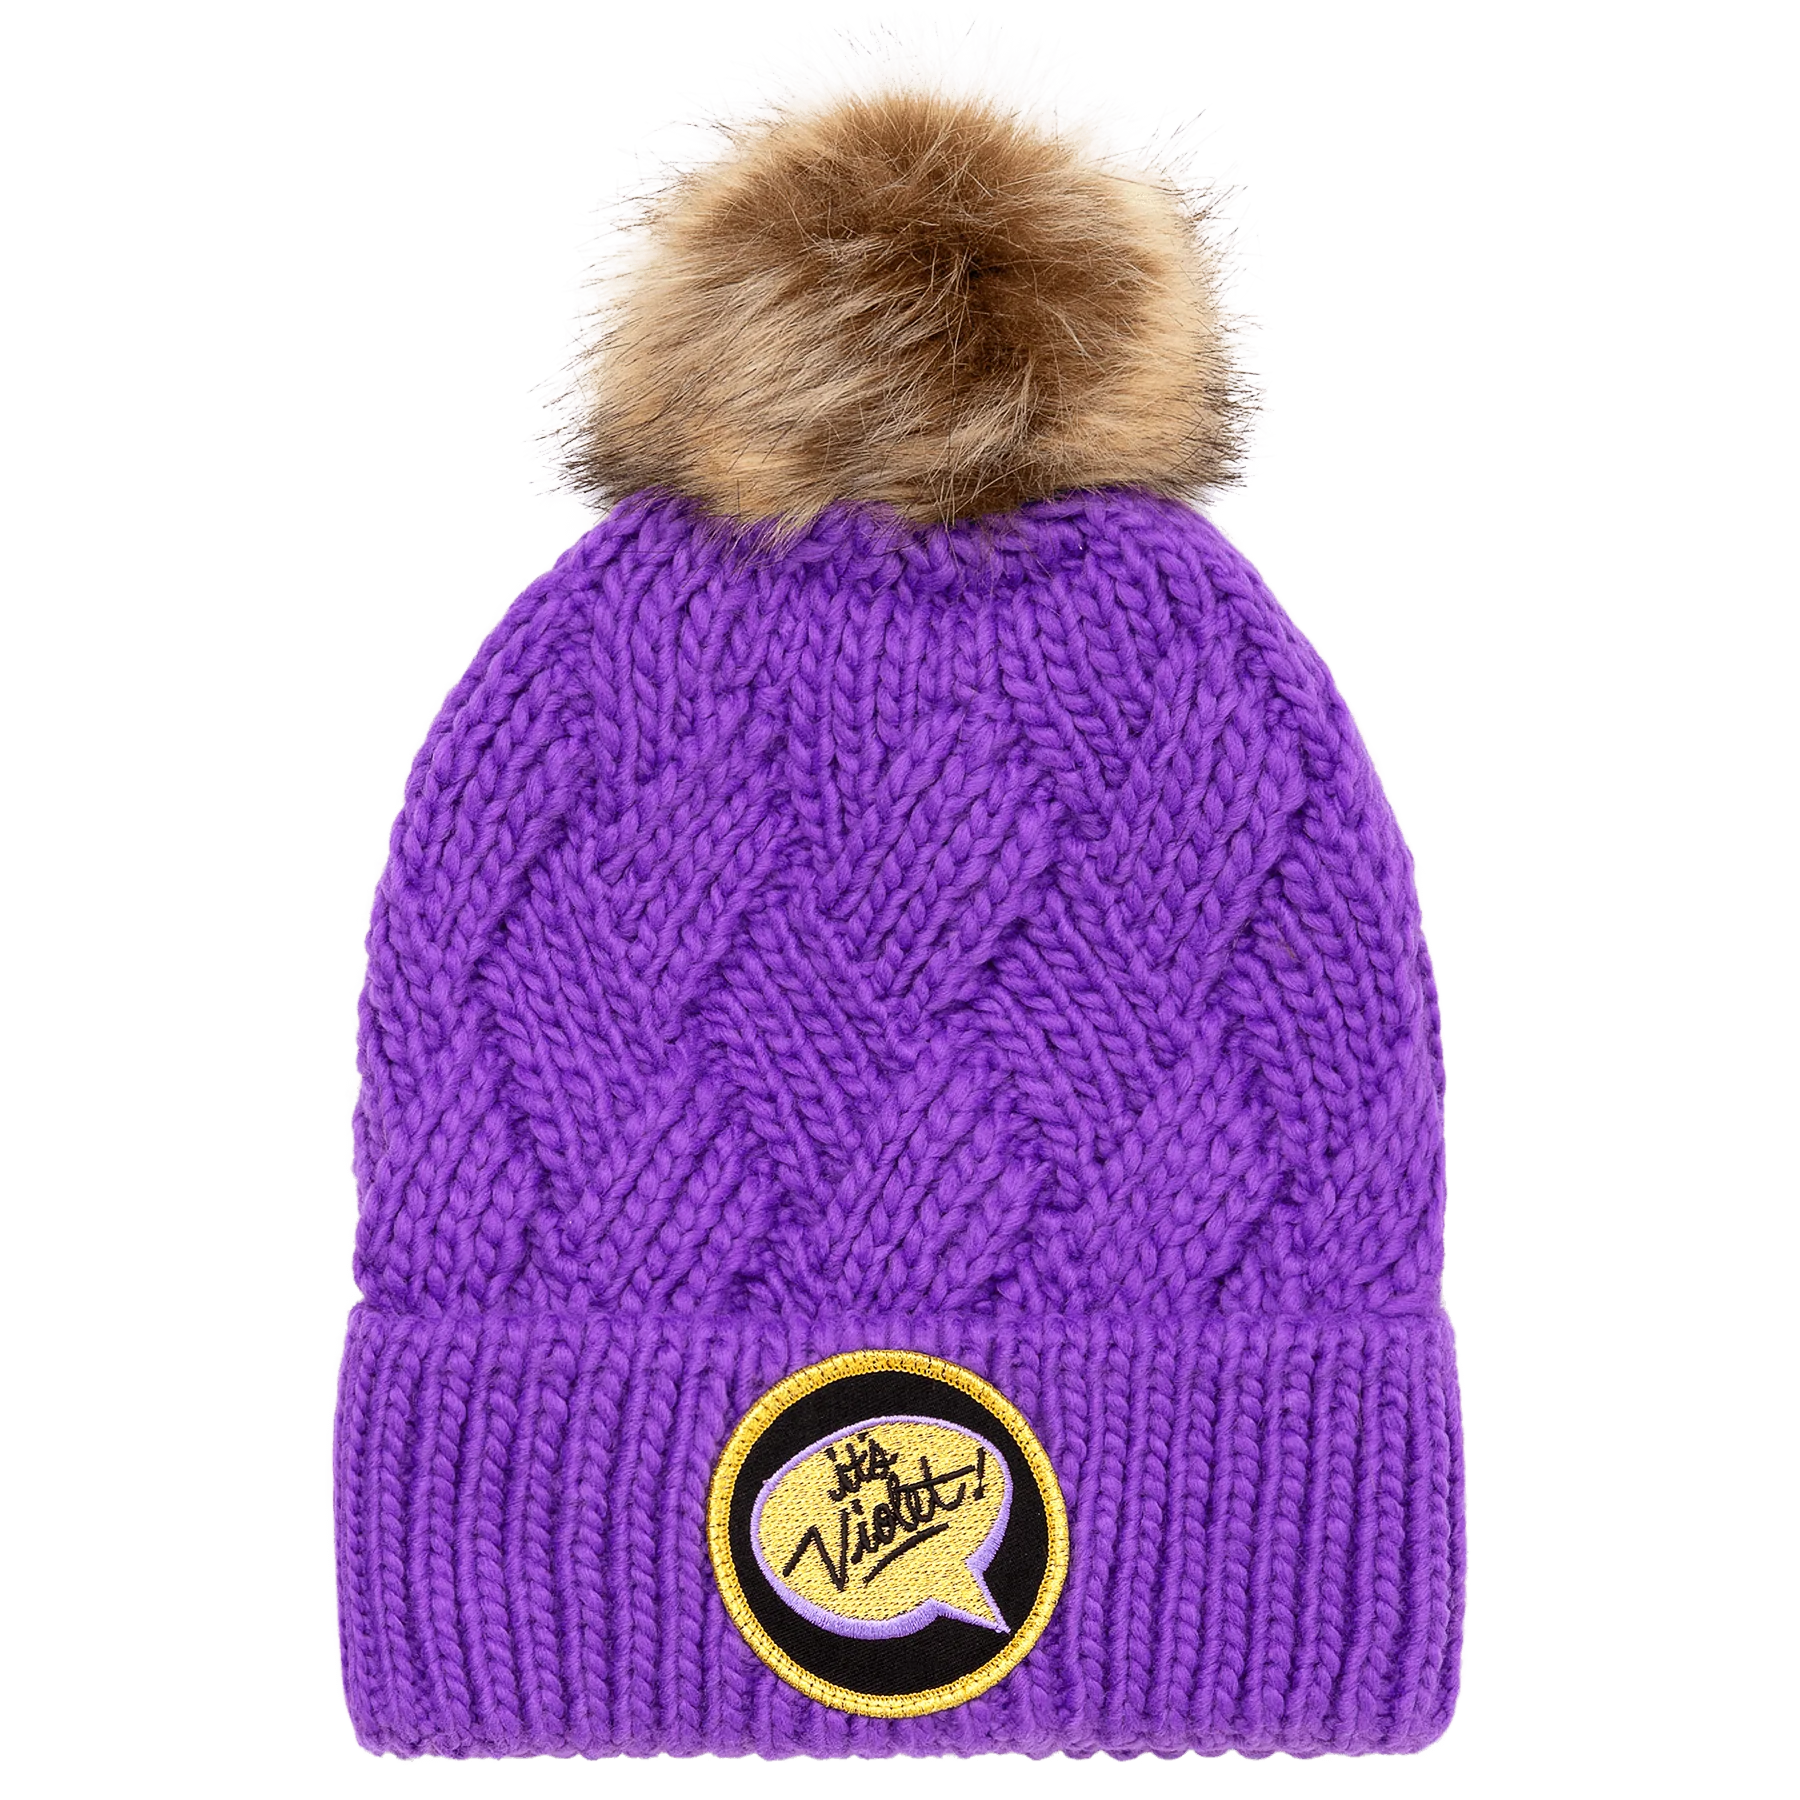 Violet - Your Girl's Beanie (She left it here)